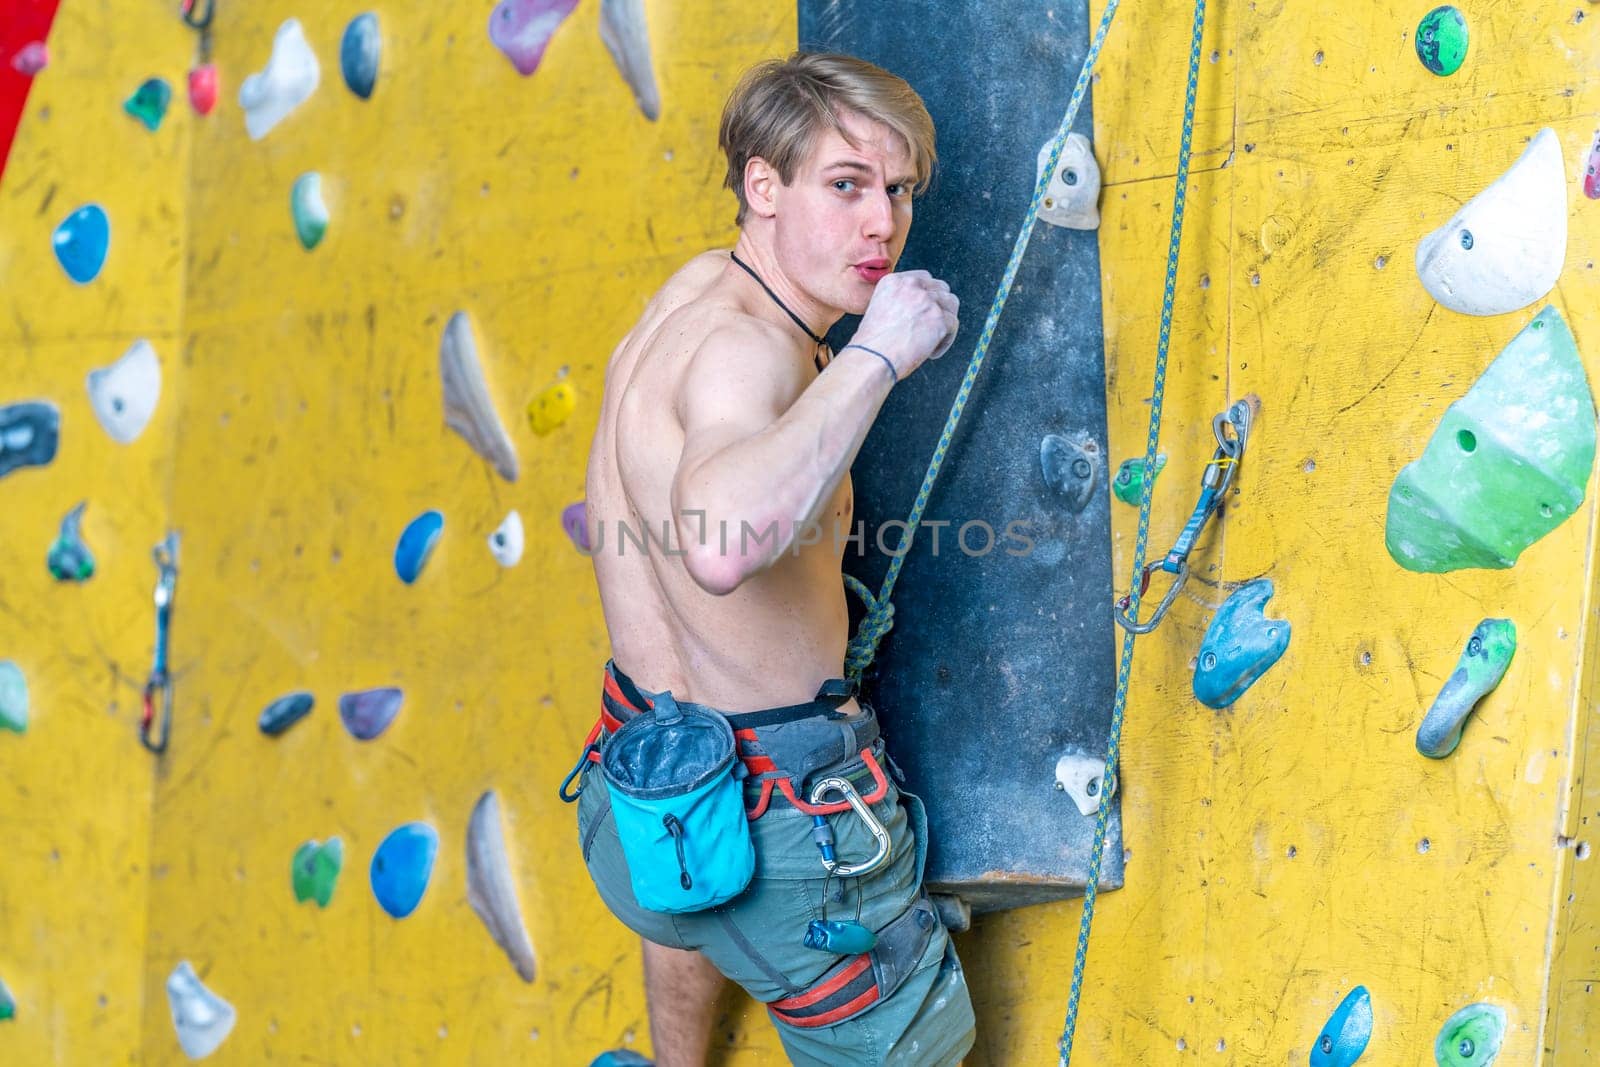 applying magnesium to the hands from the bag before climbing the climbing wall by Edophoto